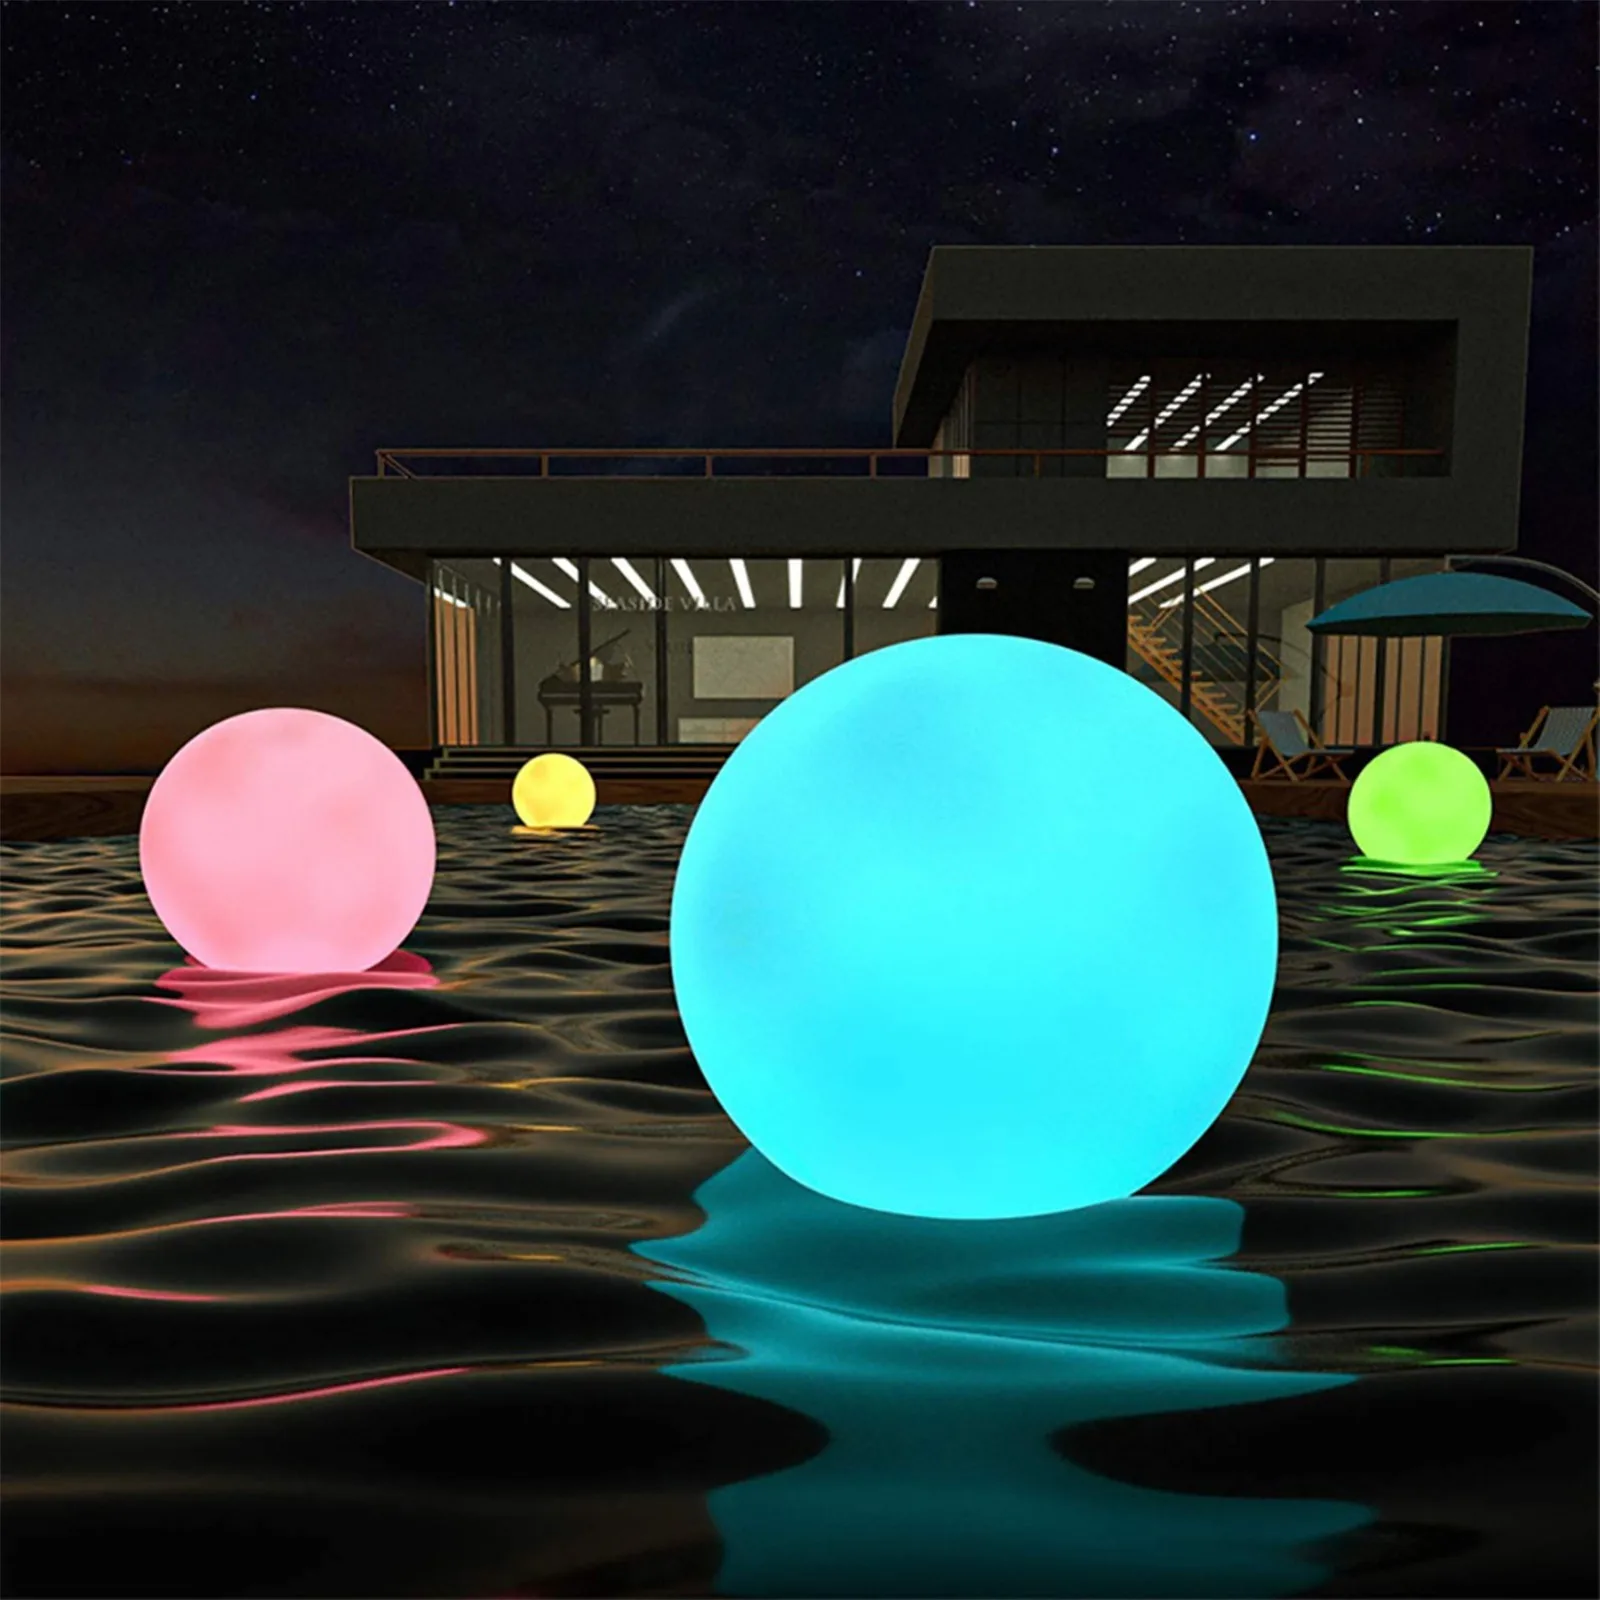 Glow in the Dark Party Supplies 16 Colors LED Light up Inflatable Ball 16 Glow Beach Ball with Remote Control Pool Toys for Swimming Pool Beach Party Games for kids adults IP67 Waterproof Class 